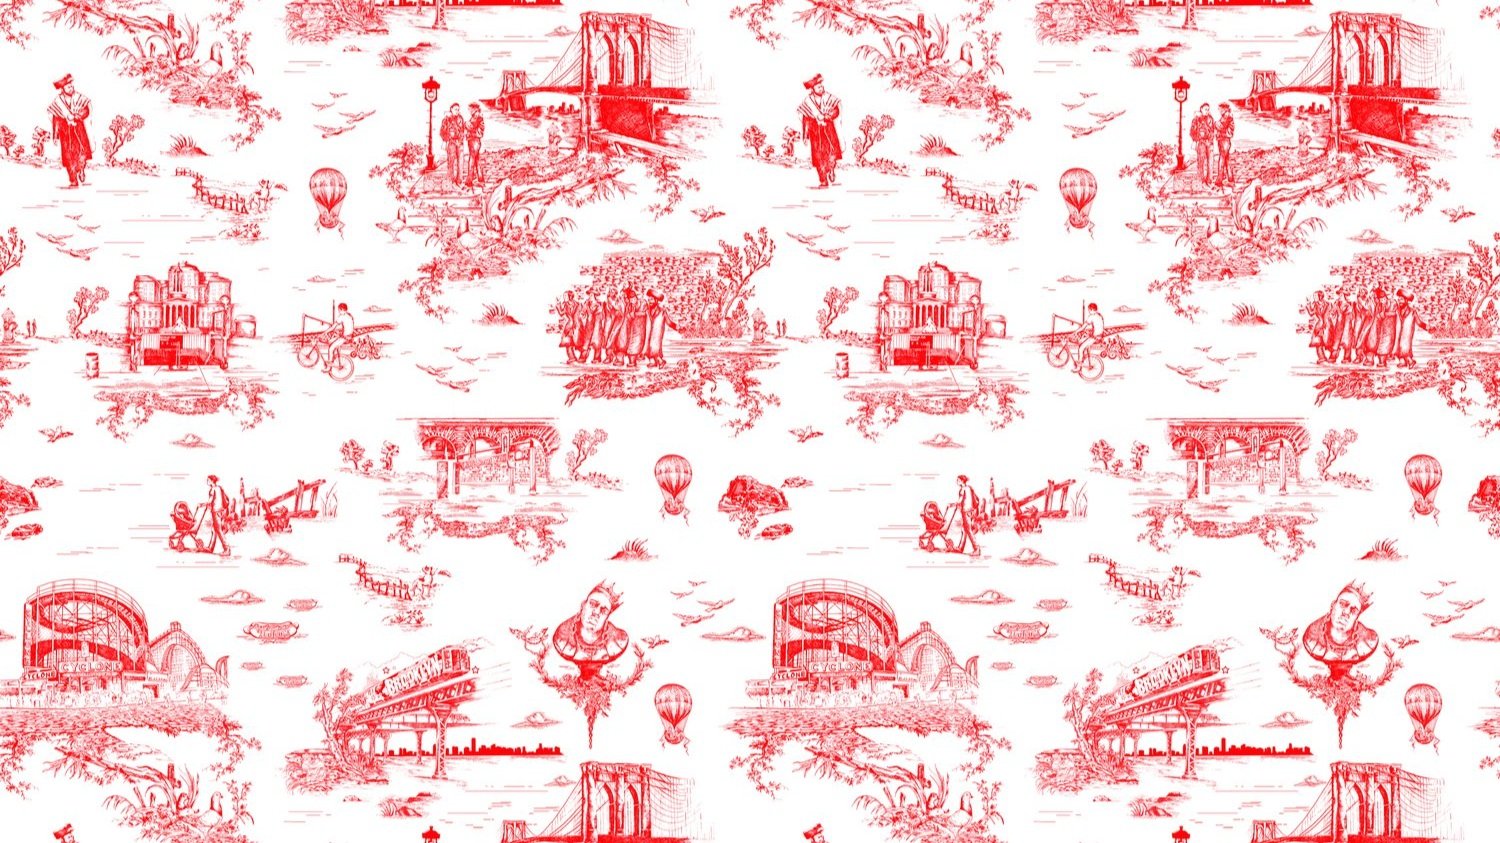 Toile De Jouy Fabric Wallpaper and Home Decor  Spoonflower